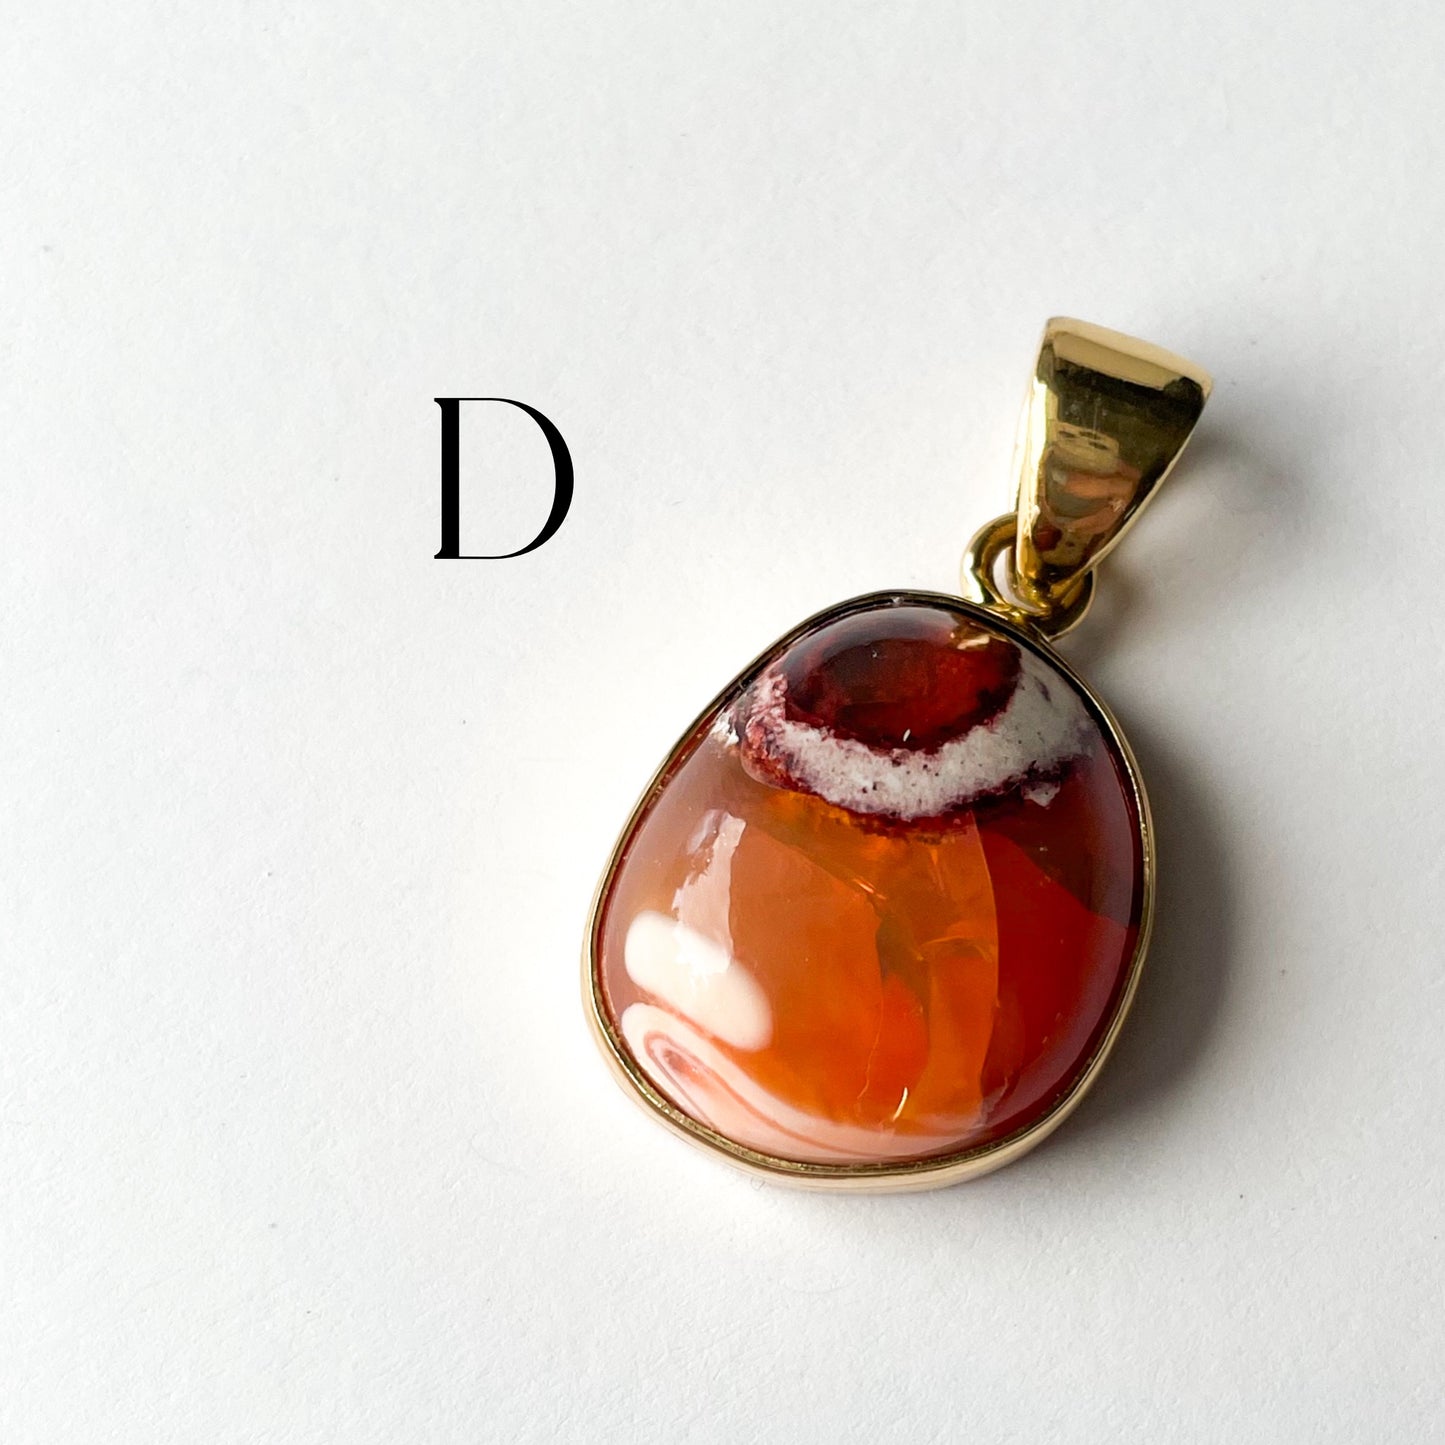 Load image into Gallery viewer, Mexican Fire Opal Pendant - Alchemia
